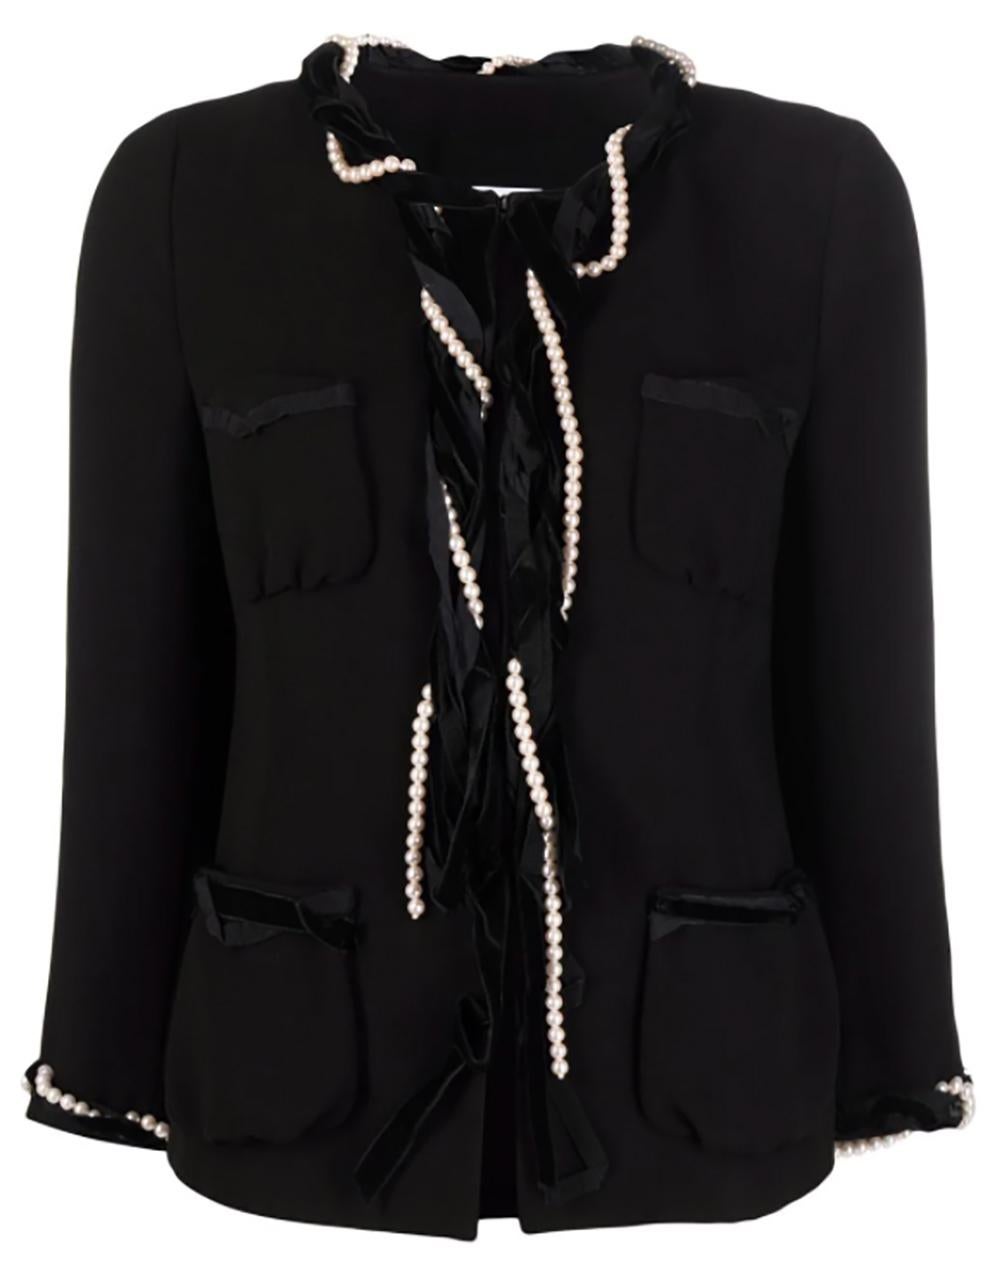 Gorgeous Moschino black pearl-embellished single-breasted jacket featuring grosgrain ribbon trim, a round neck, front hook and eye fastening, four front patch pockets and a straight hem.
In excellent vintage condition. Made in Italy.
Estimated size